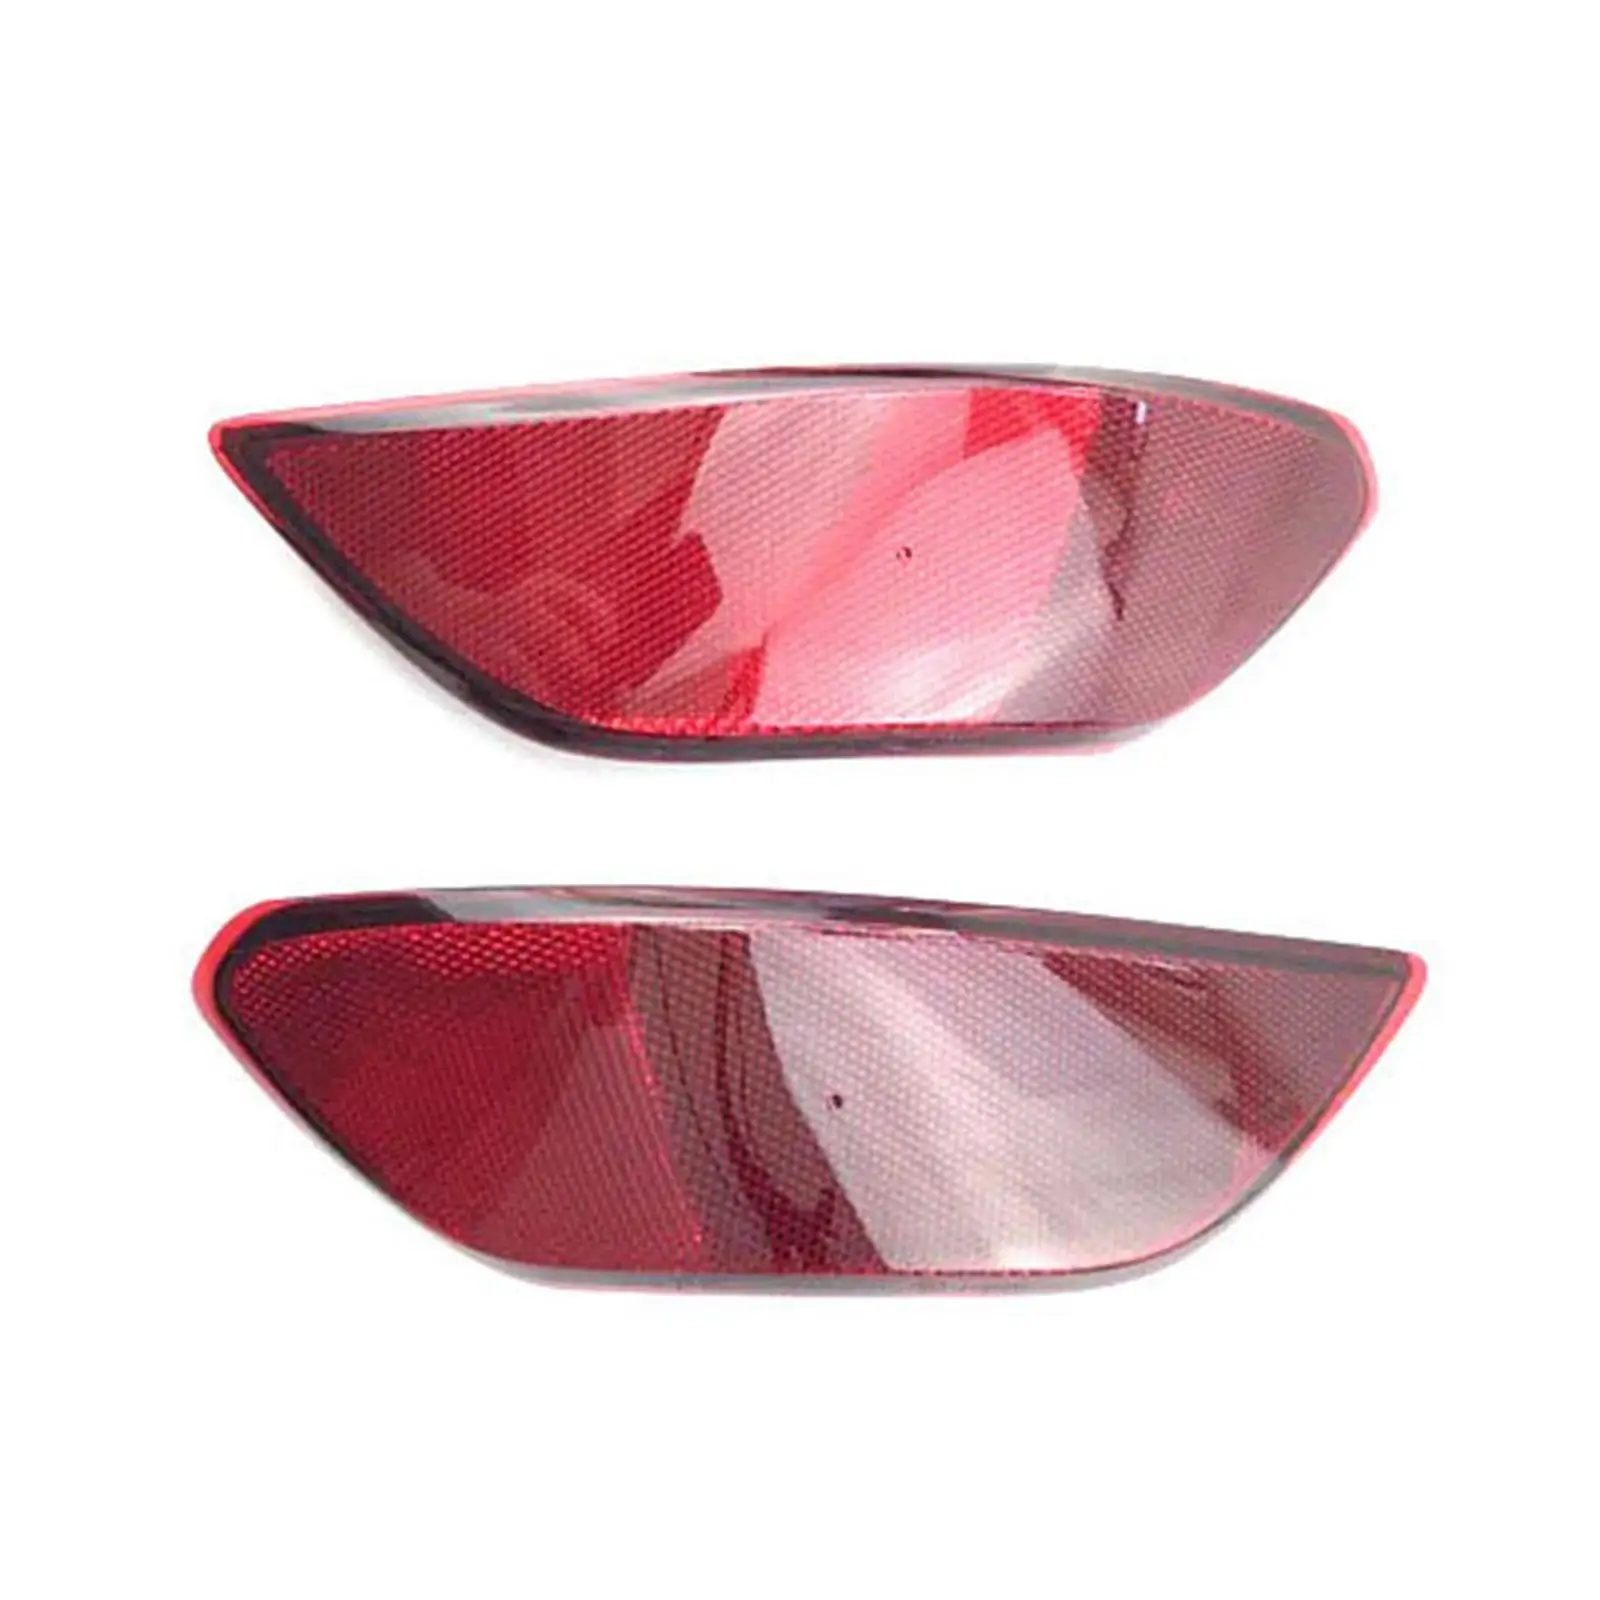 Reflector for Car Rear Reflective Reflection Marker Reflector for Porsche Cayenne Car Accessories Easy to Install Replaces